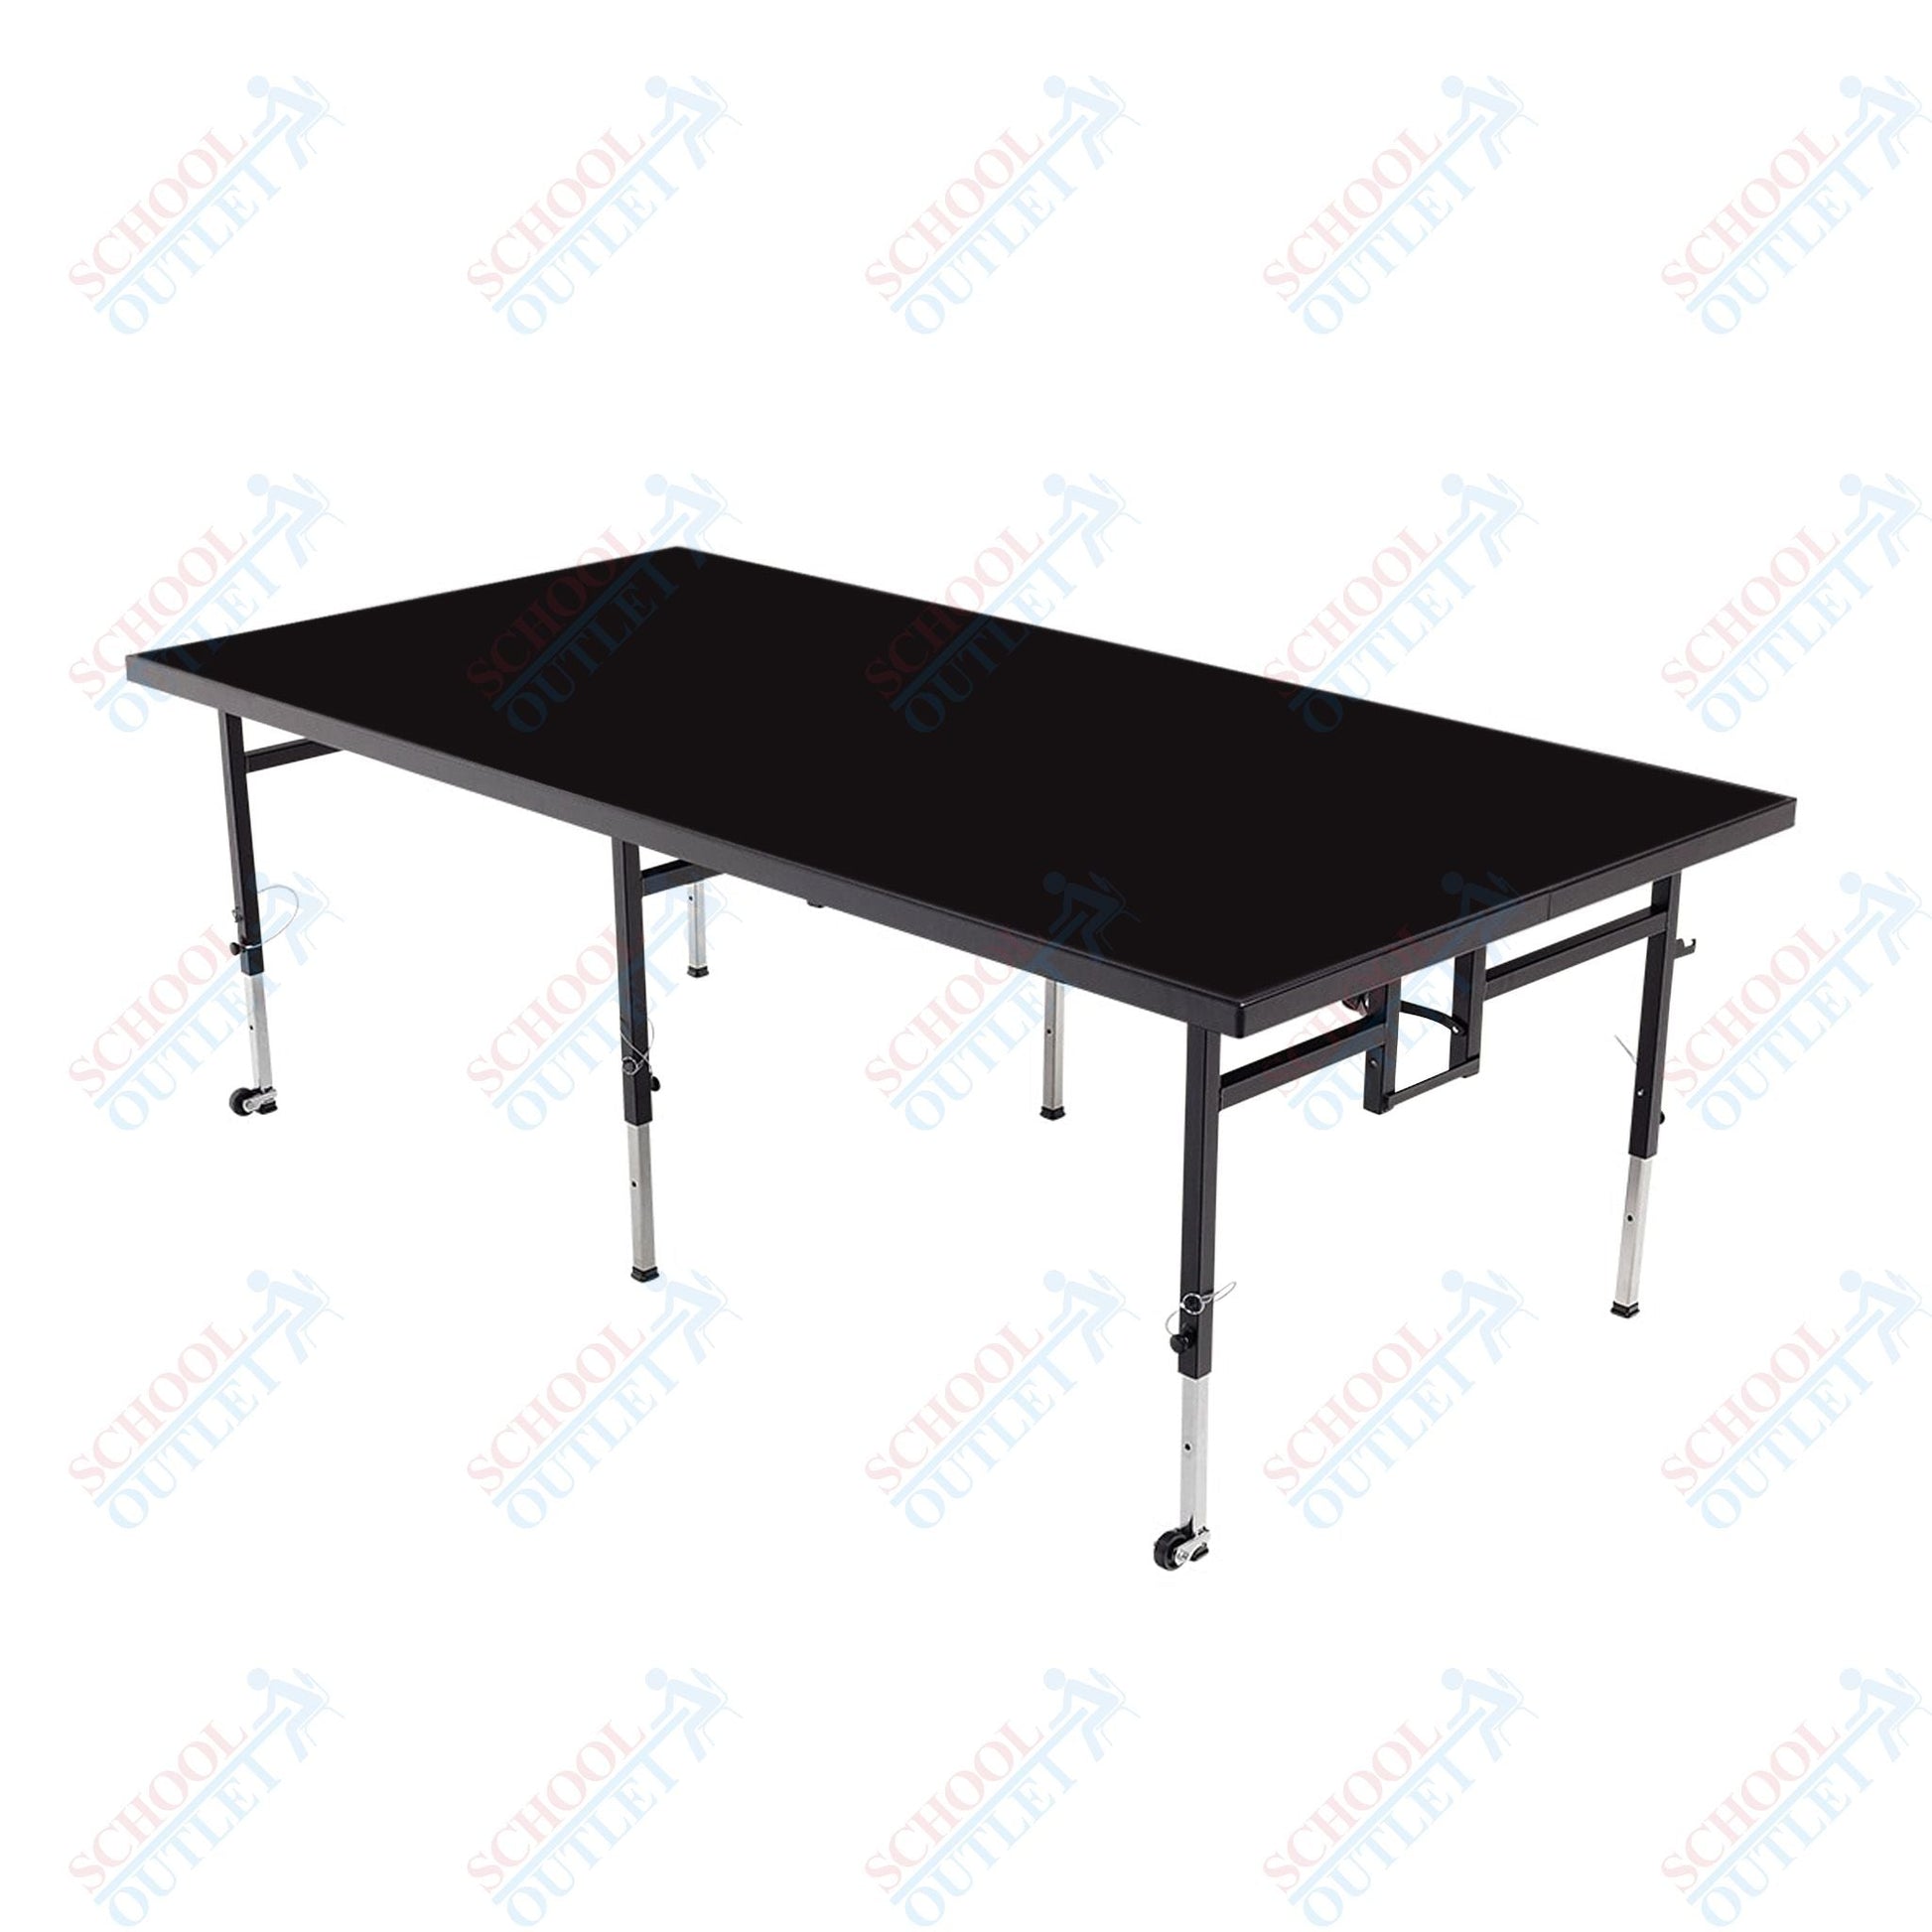 AmTab Adjustable Height Stage - Polypropylene Top - 48"W x 72"L x Adjustable 24" to 32"H (AmTab AMT-STA4624P) - SchoolOutlet